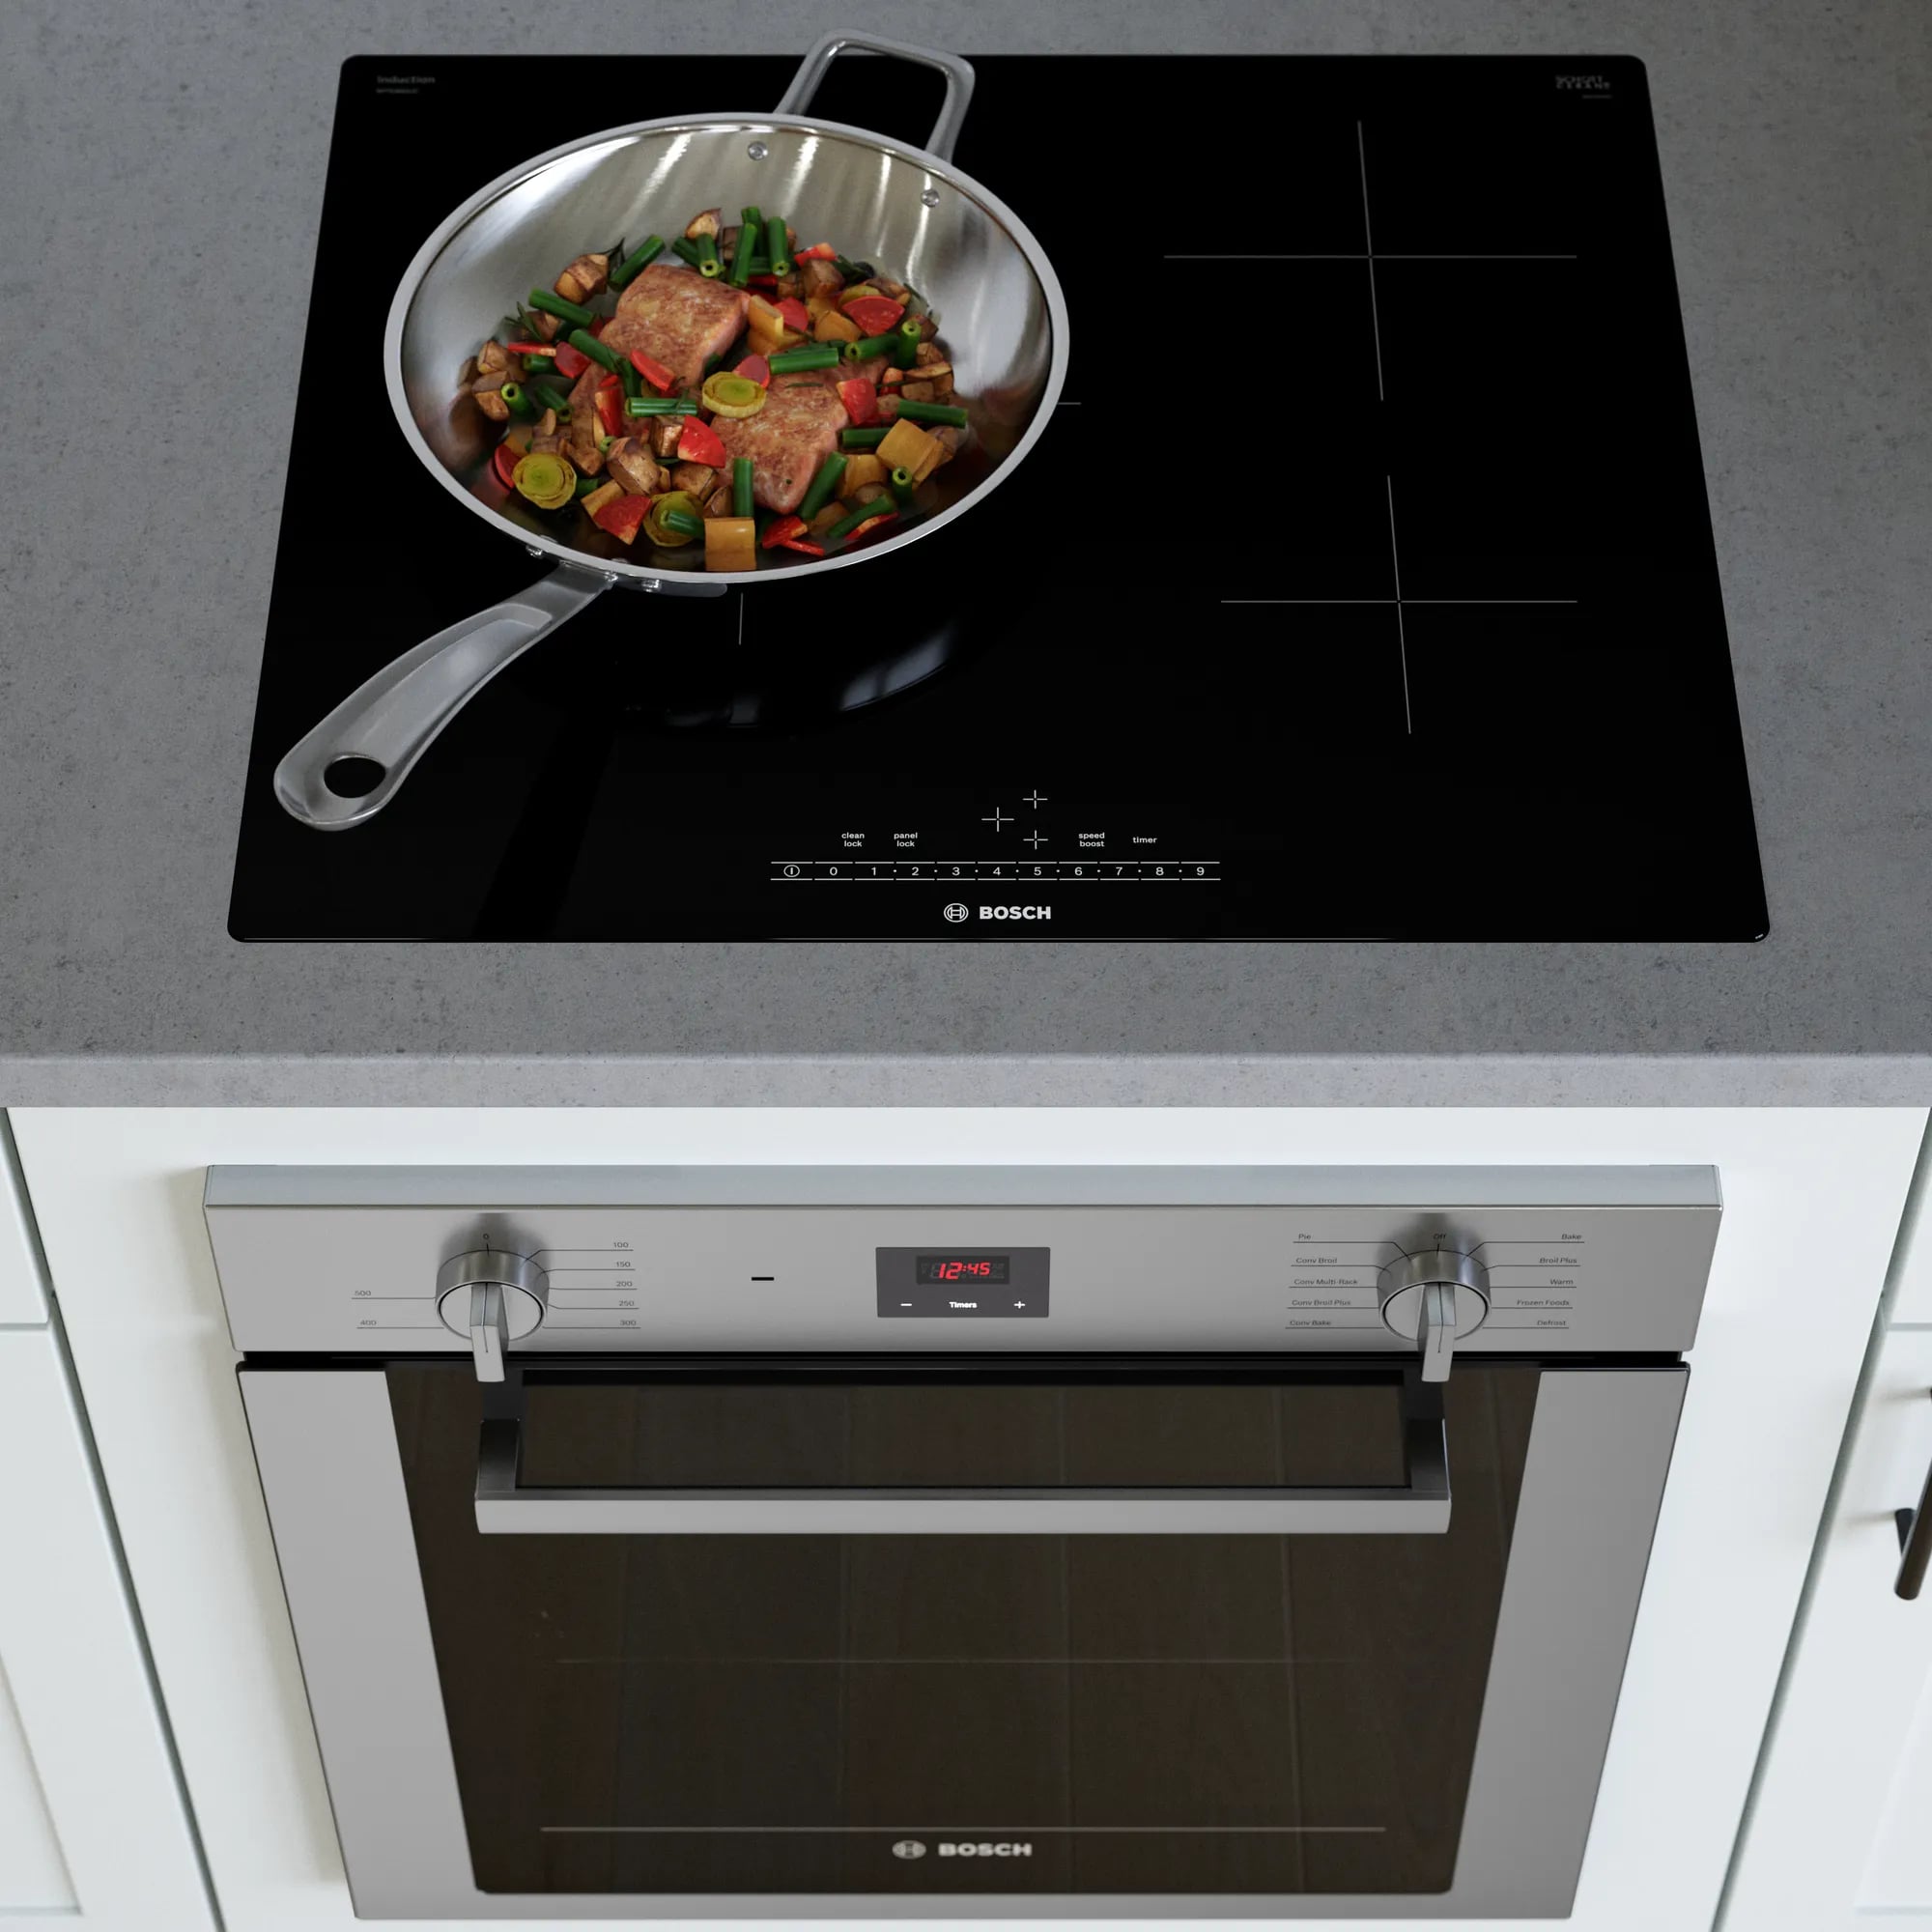 Bosch - 24 inch wide Induction Cooktop in Black - NIT5460UC